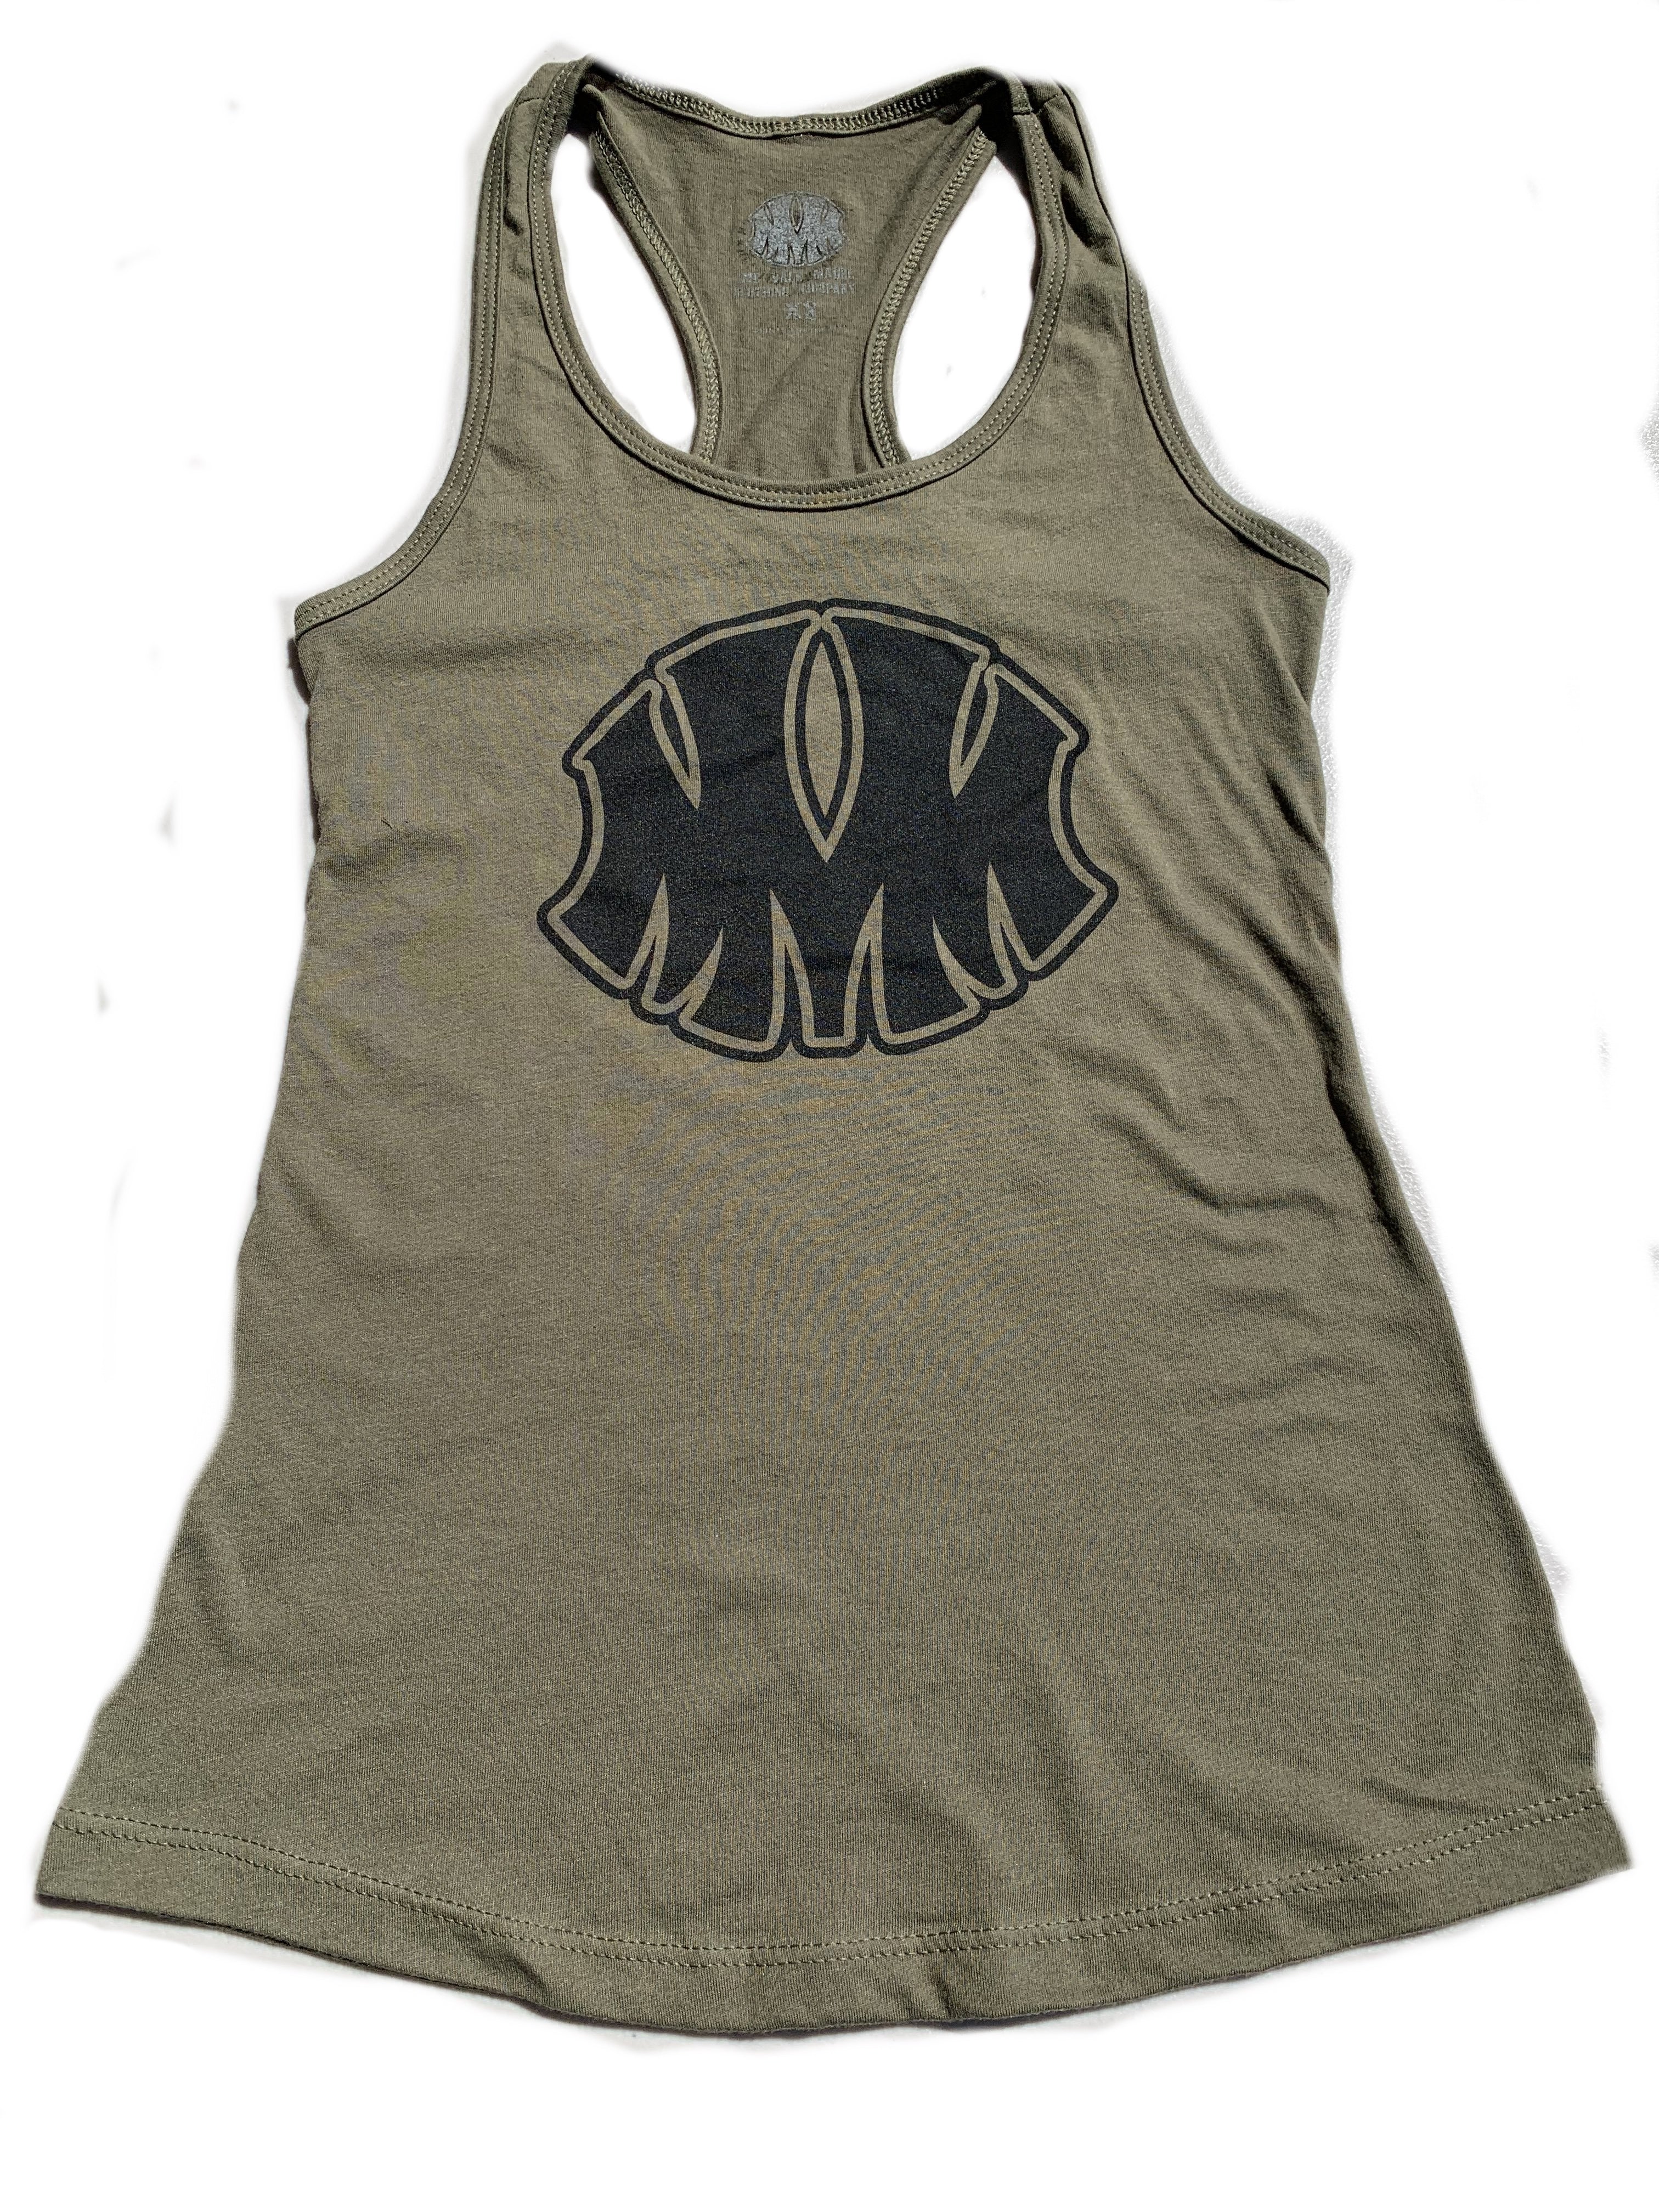 Ladie's Military Green Racerback Tank - Me Vale Madre Clothing